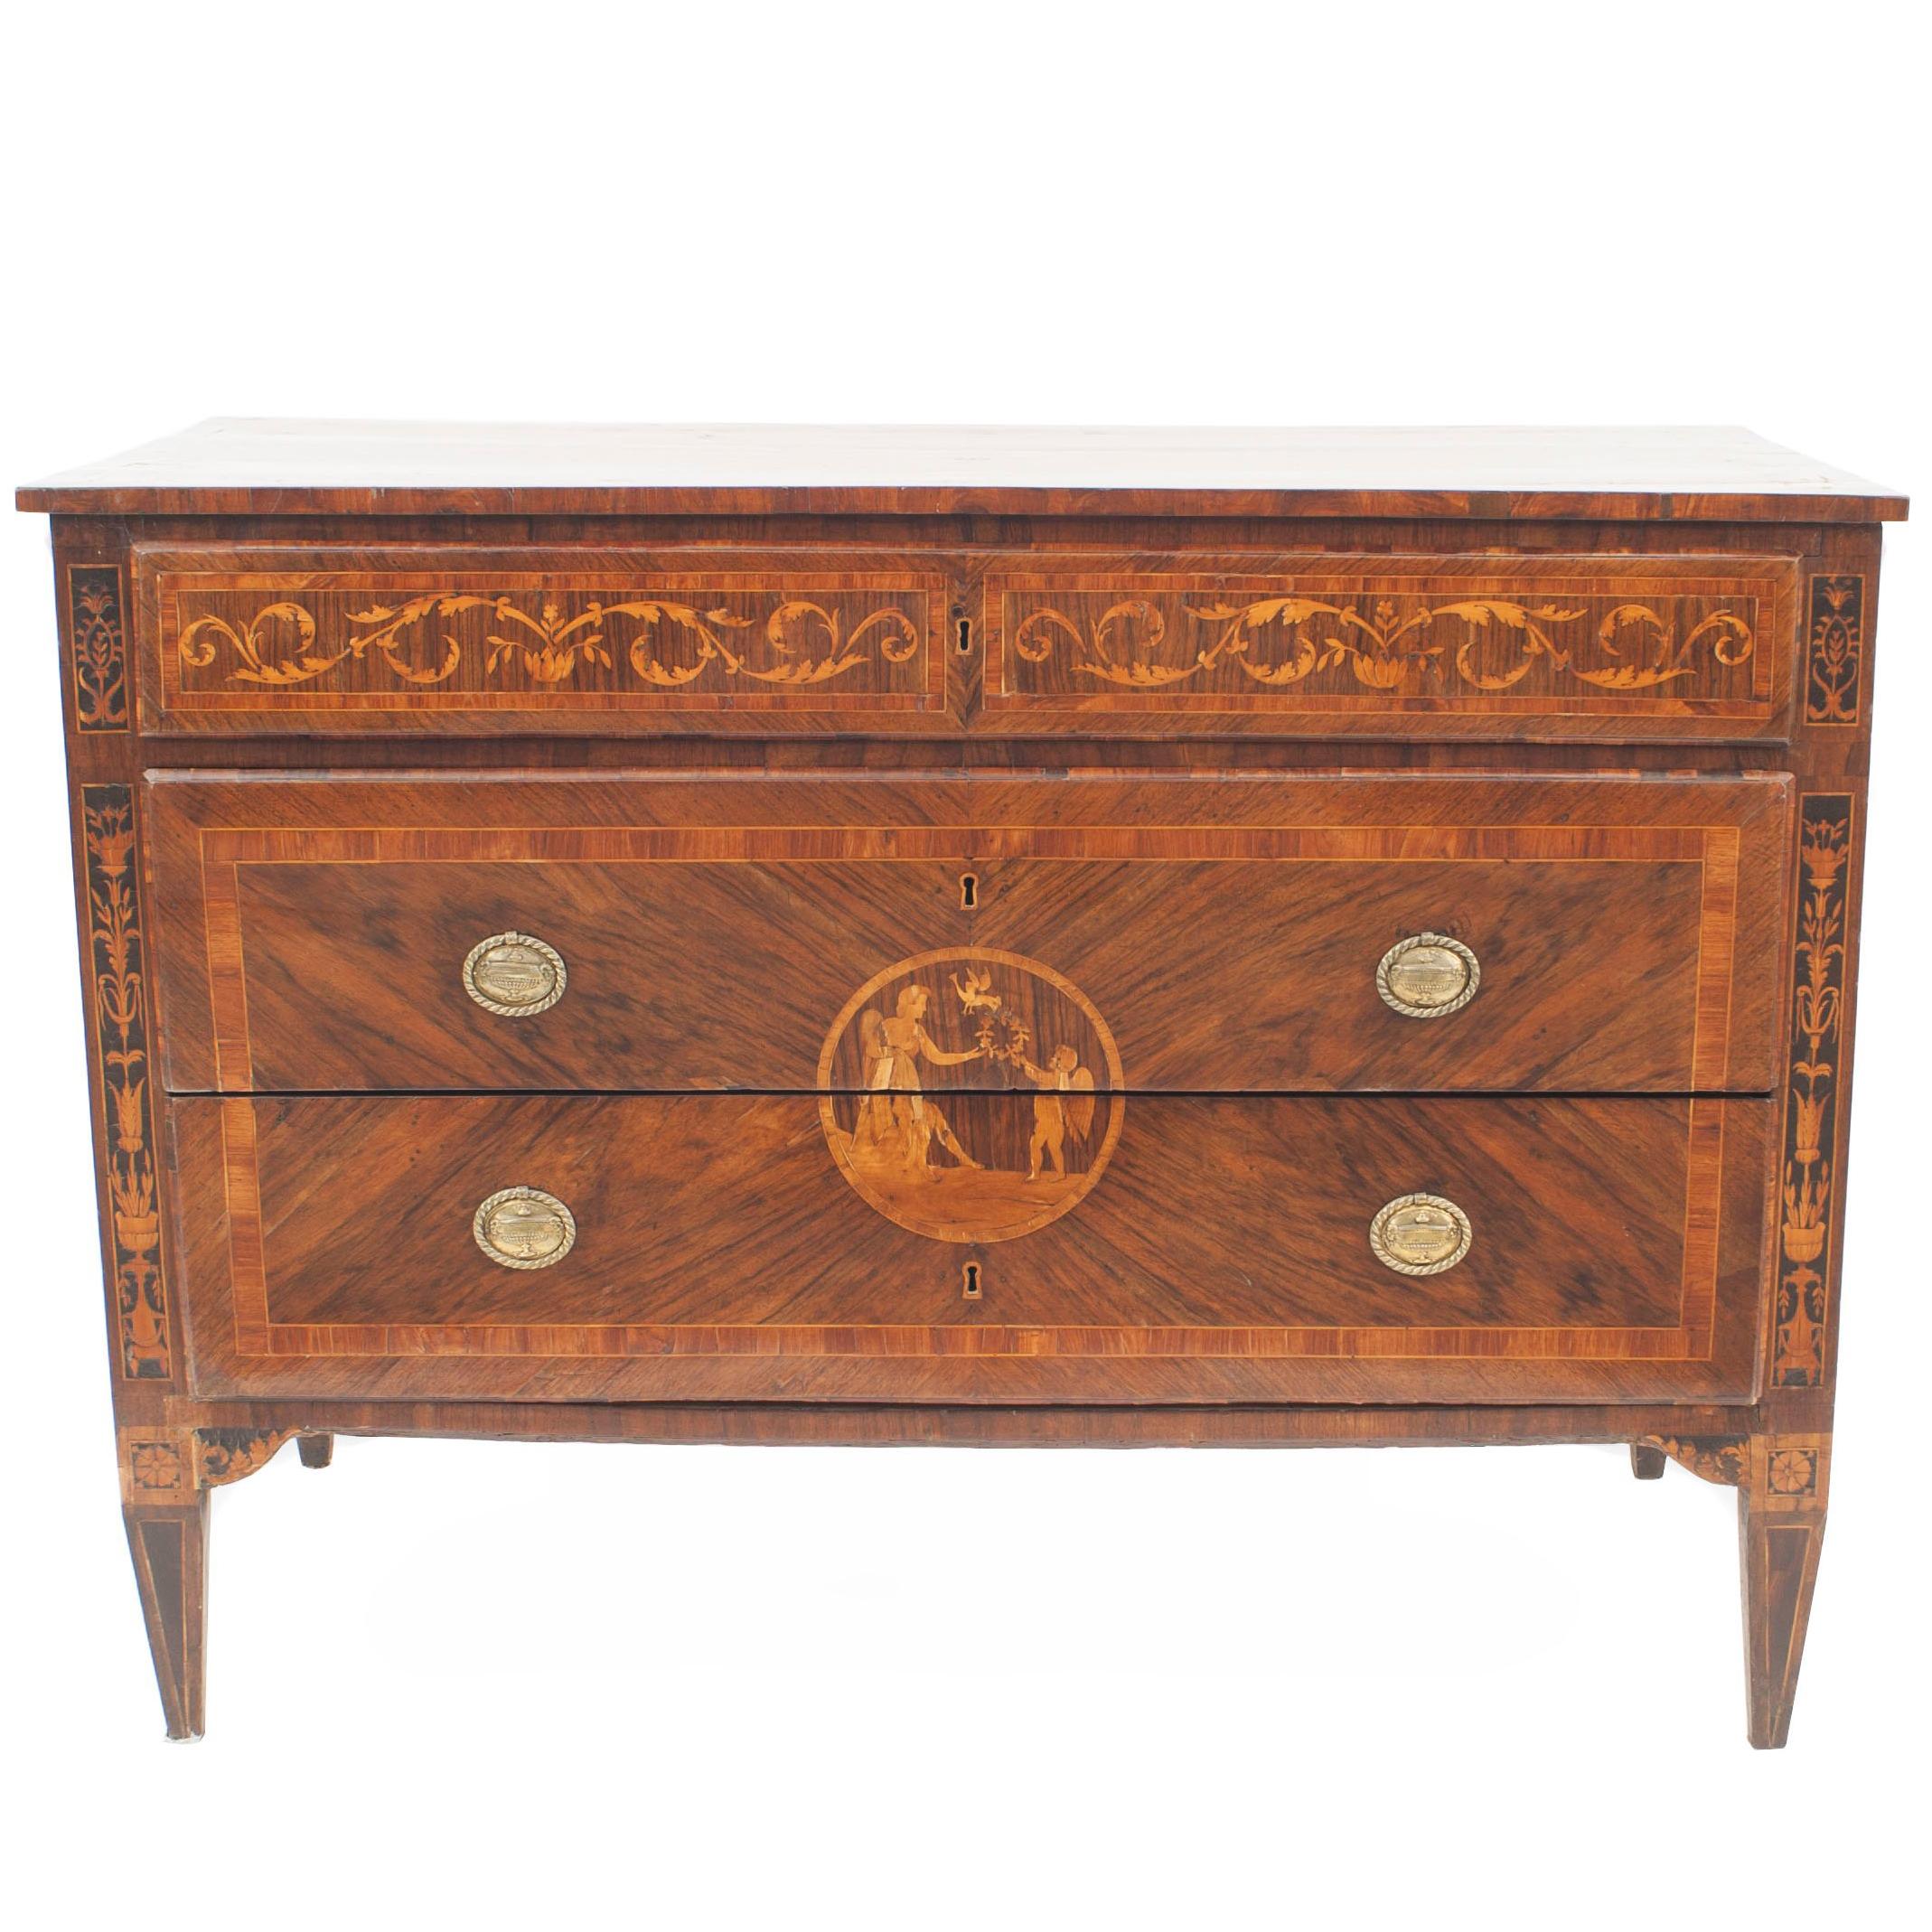 Italian Neo-Classic Walnut Commode with Marquetry